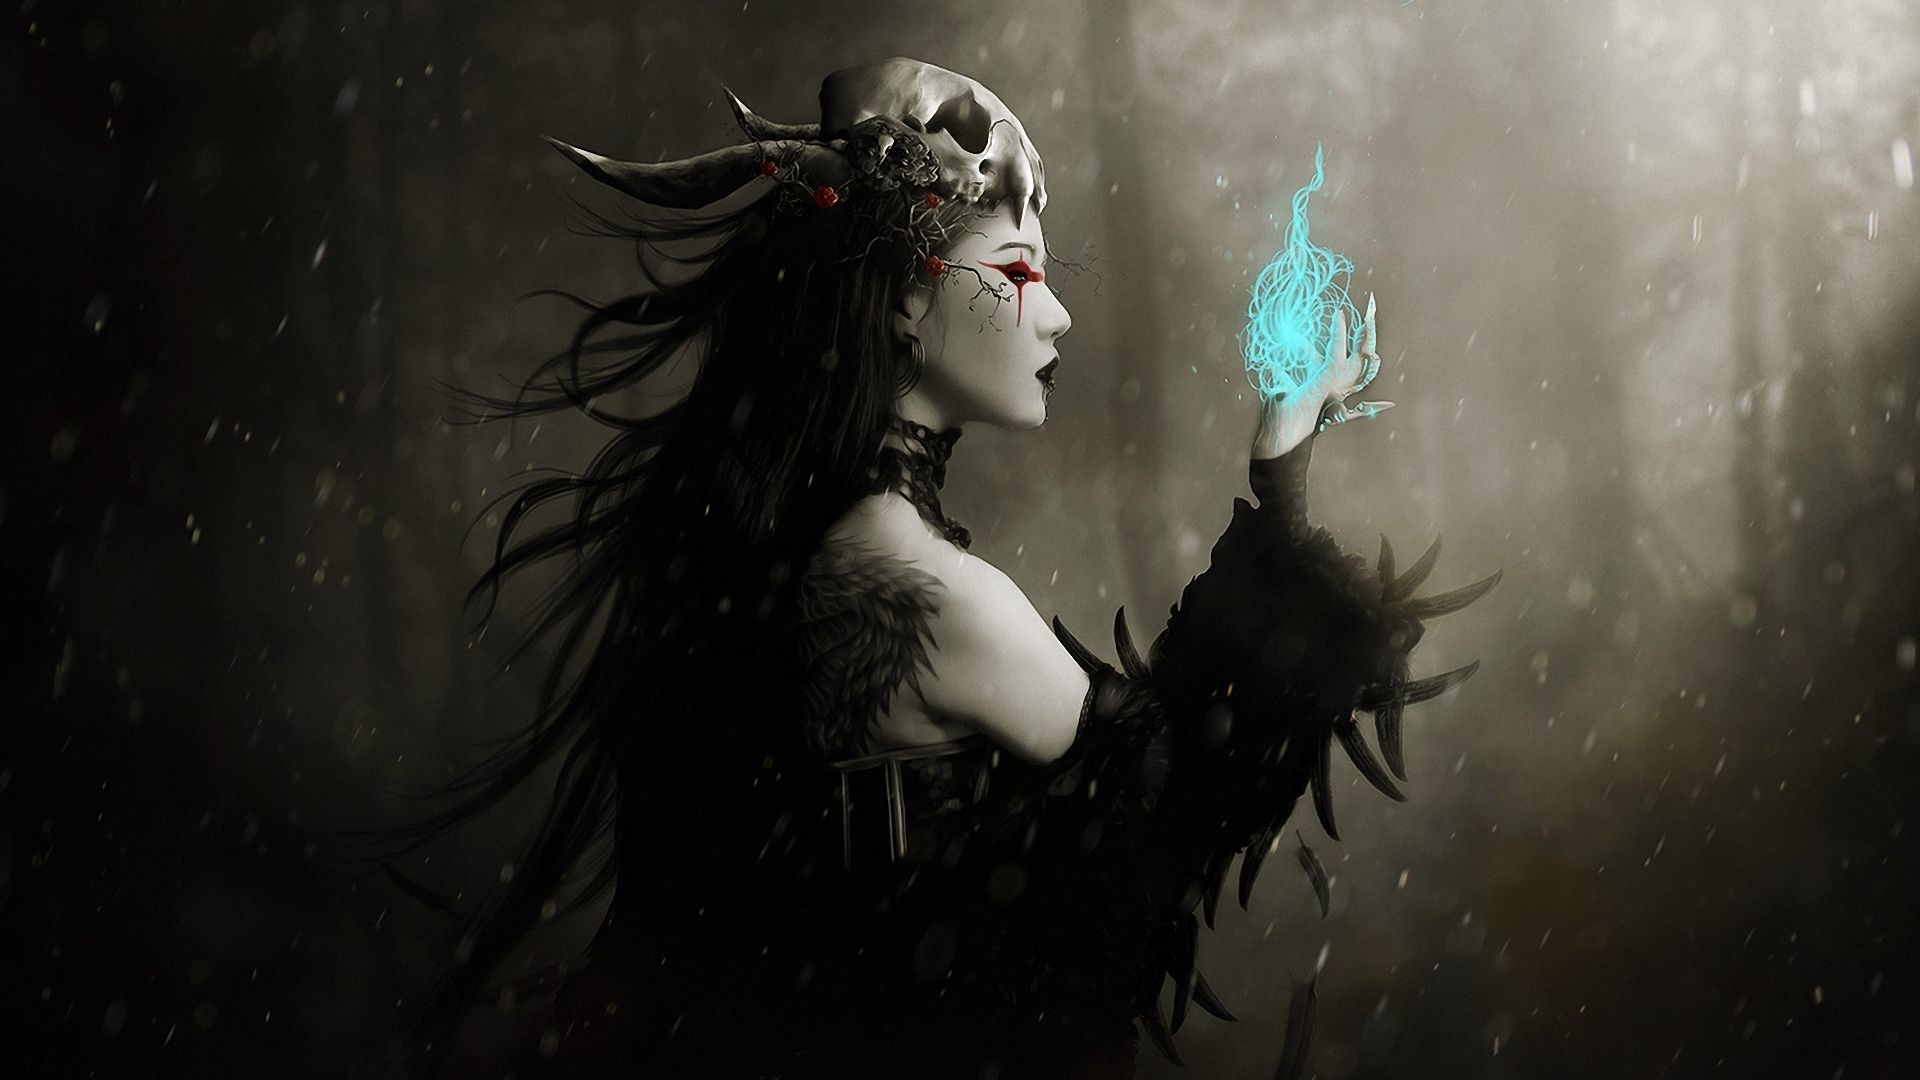 1920x1080 Free Download Girl Magic Profile Feathers Skull Tattoo Wood Witch Wallpaper 1920x1297 For Your Desktop Mobile Tablet Explore Beautiful Witches Wallpaper Witches Wallpaper Picture Beautiful Blue Wallpaper Halloween Witch Wallpaper